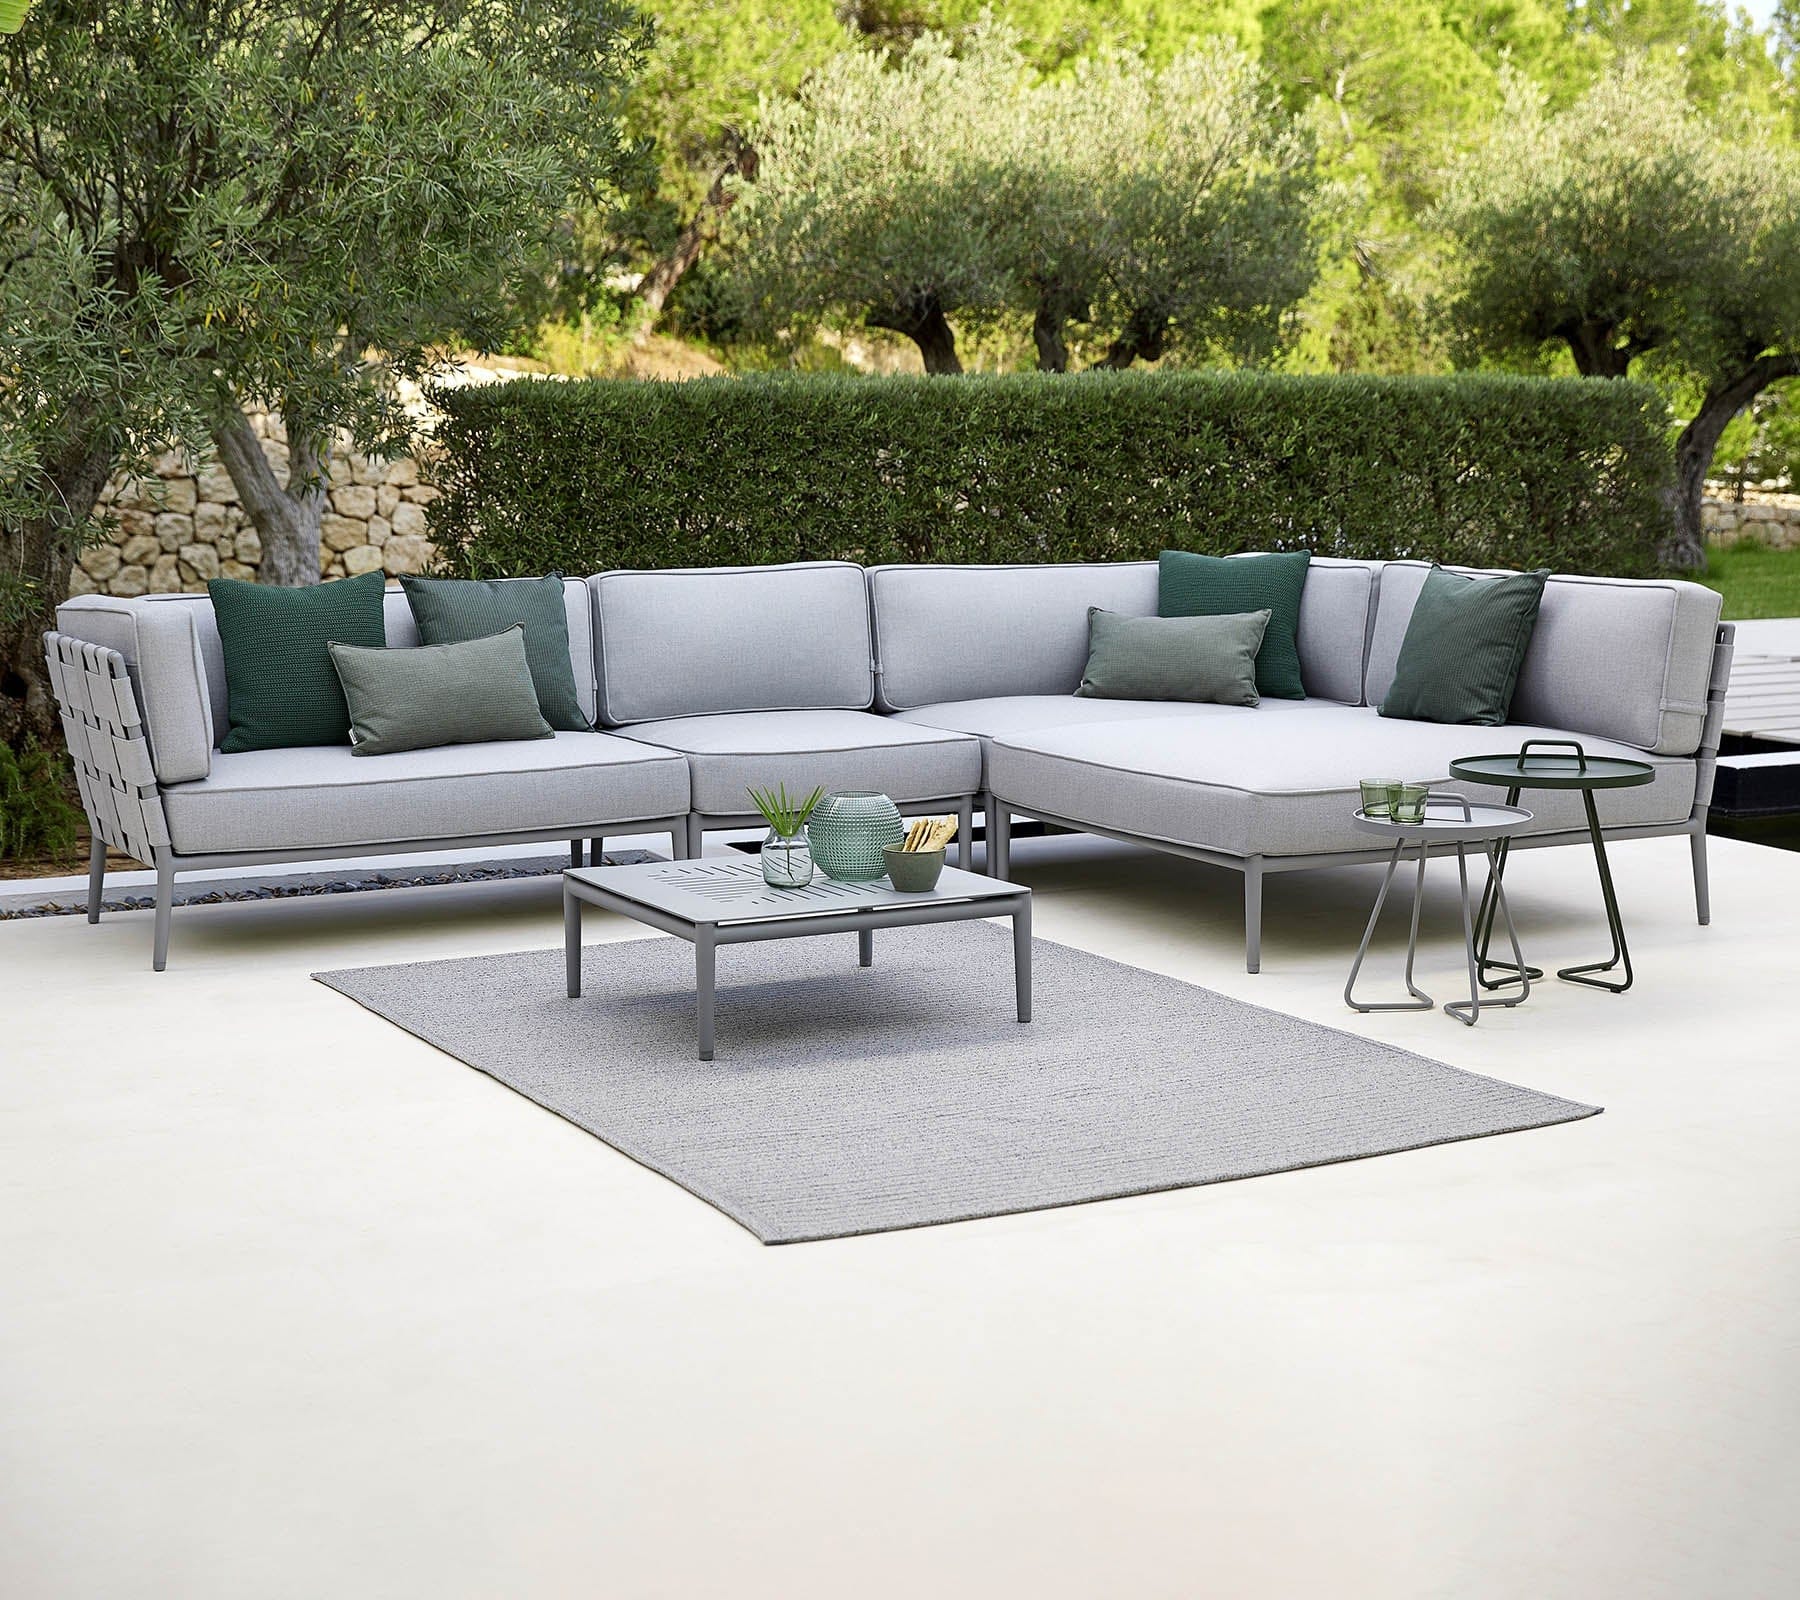 Boxhill's Conic Single Seater Sofa Module Light Grey lifestyle image with Conic Module Sofa and Conic Coffee Table at patio